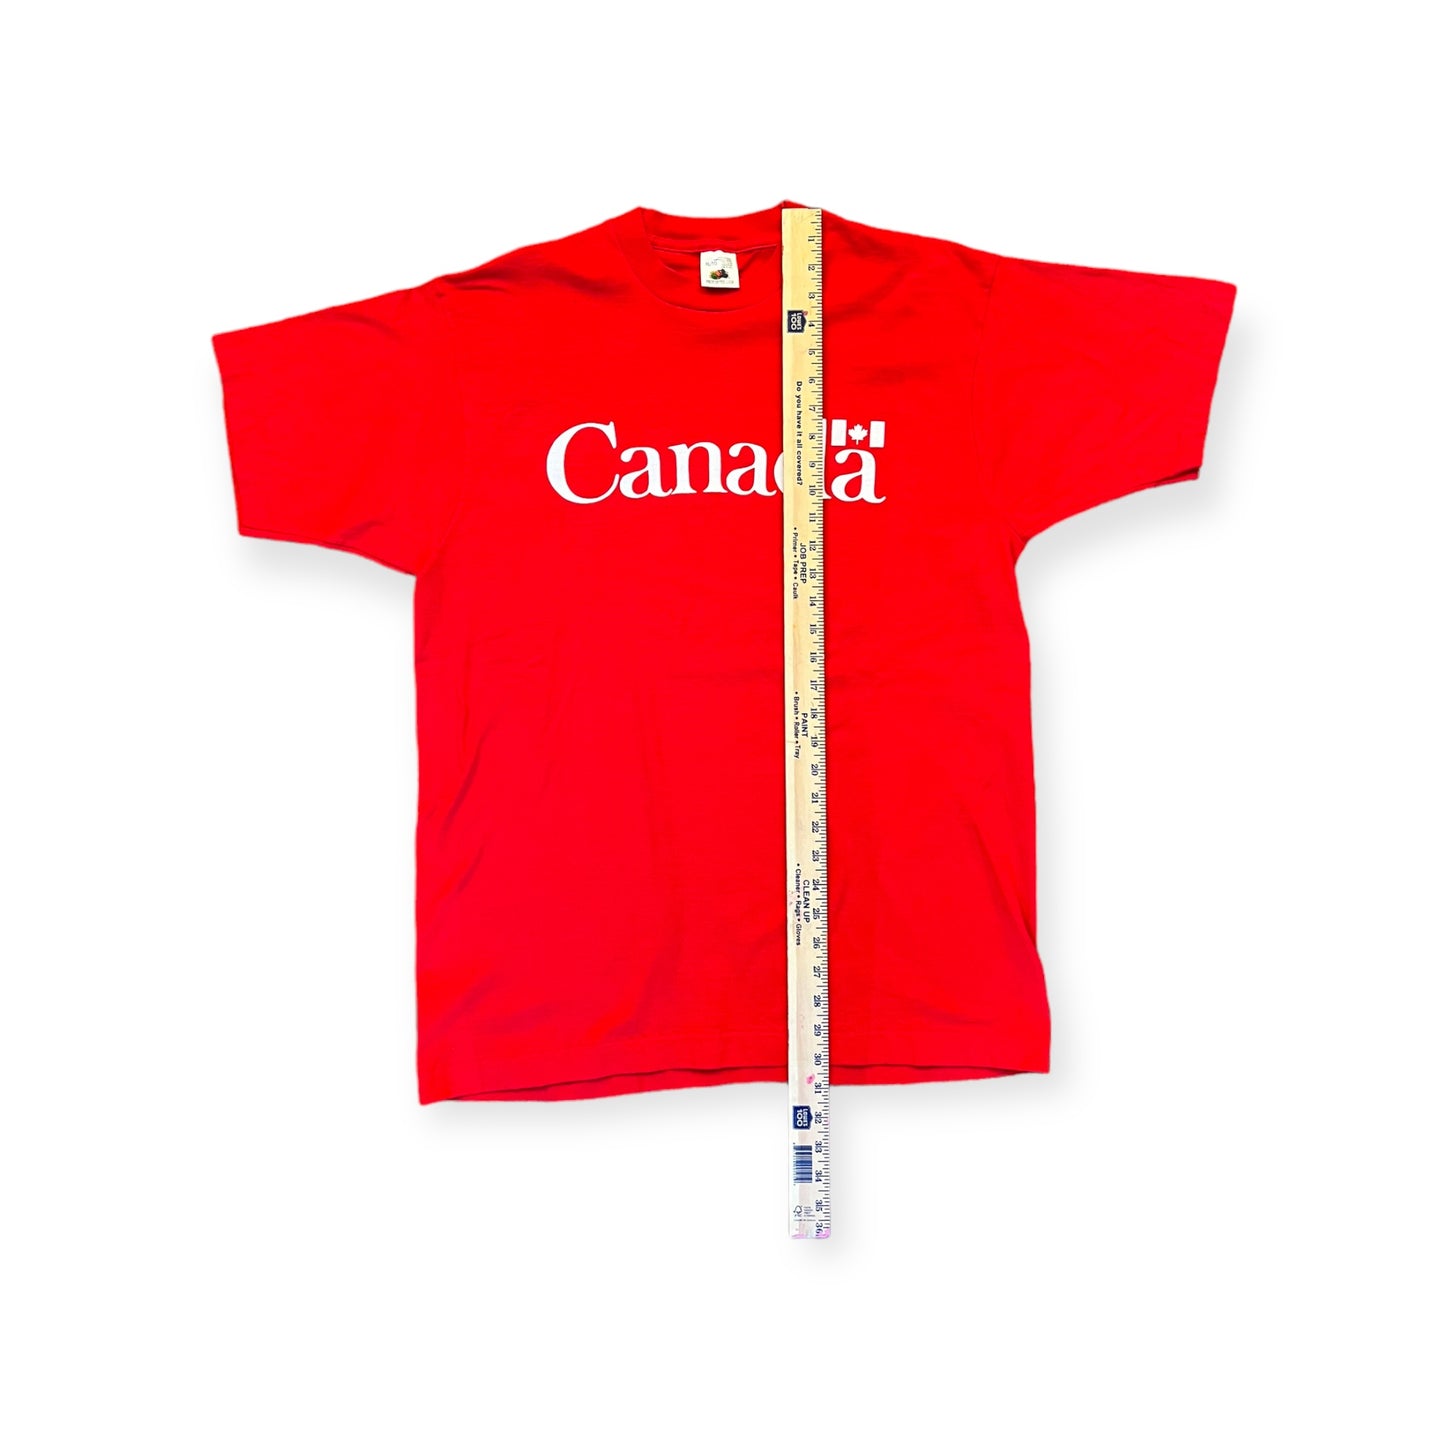 Vintage Canada "Made in Canada" Tee - XL